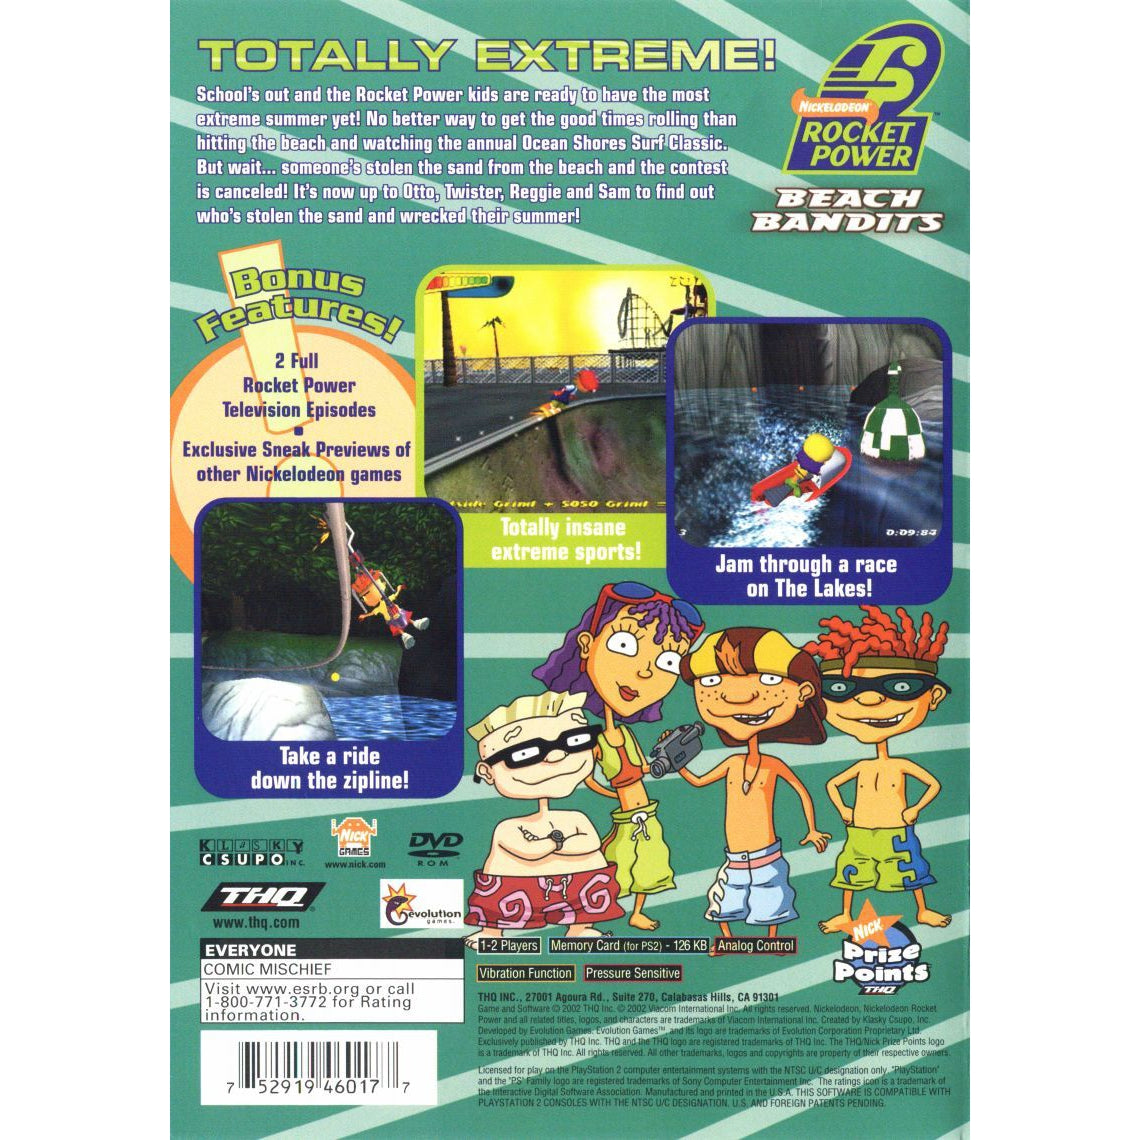 Nickelodeon: Rocket Power - Beach Bandits - PlayStation 2 (PS2) Game Complete - YourGamingShop.com - Buy, Sell, Trade Video Games Online. 120 Day Warranty. Satisfaction Guaranteed.